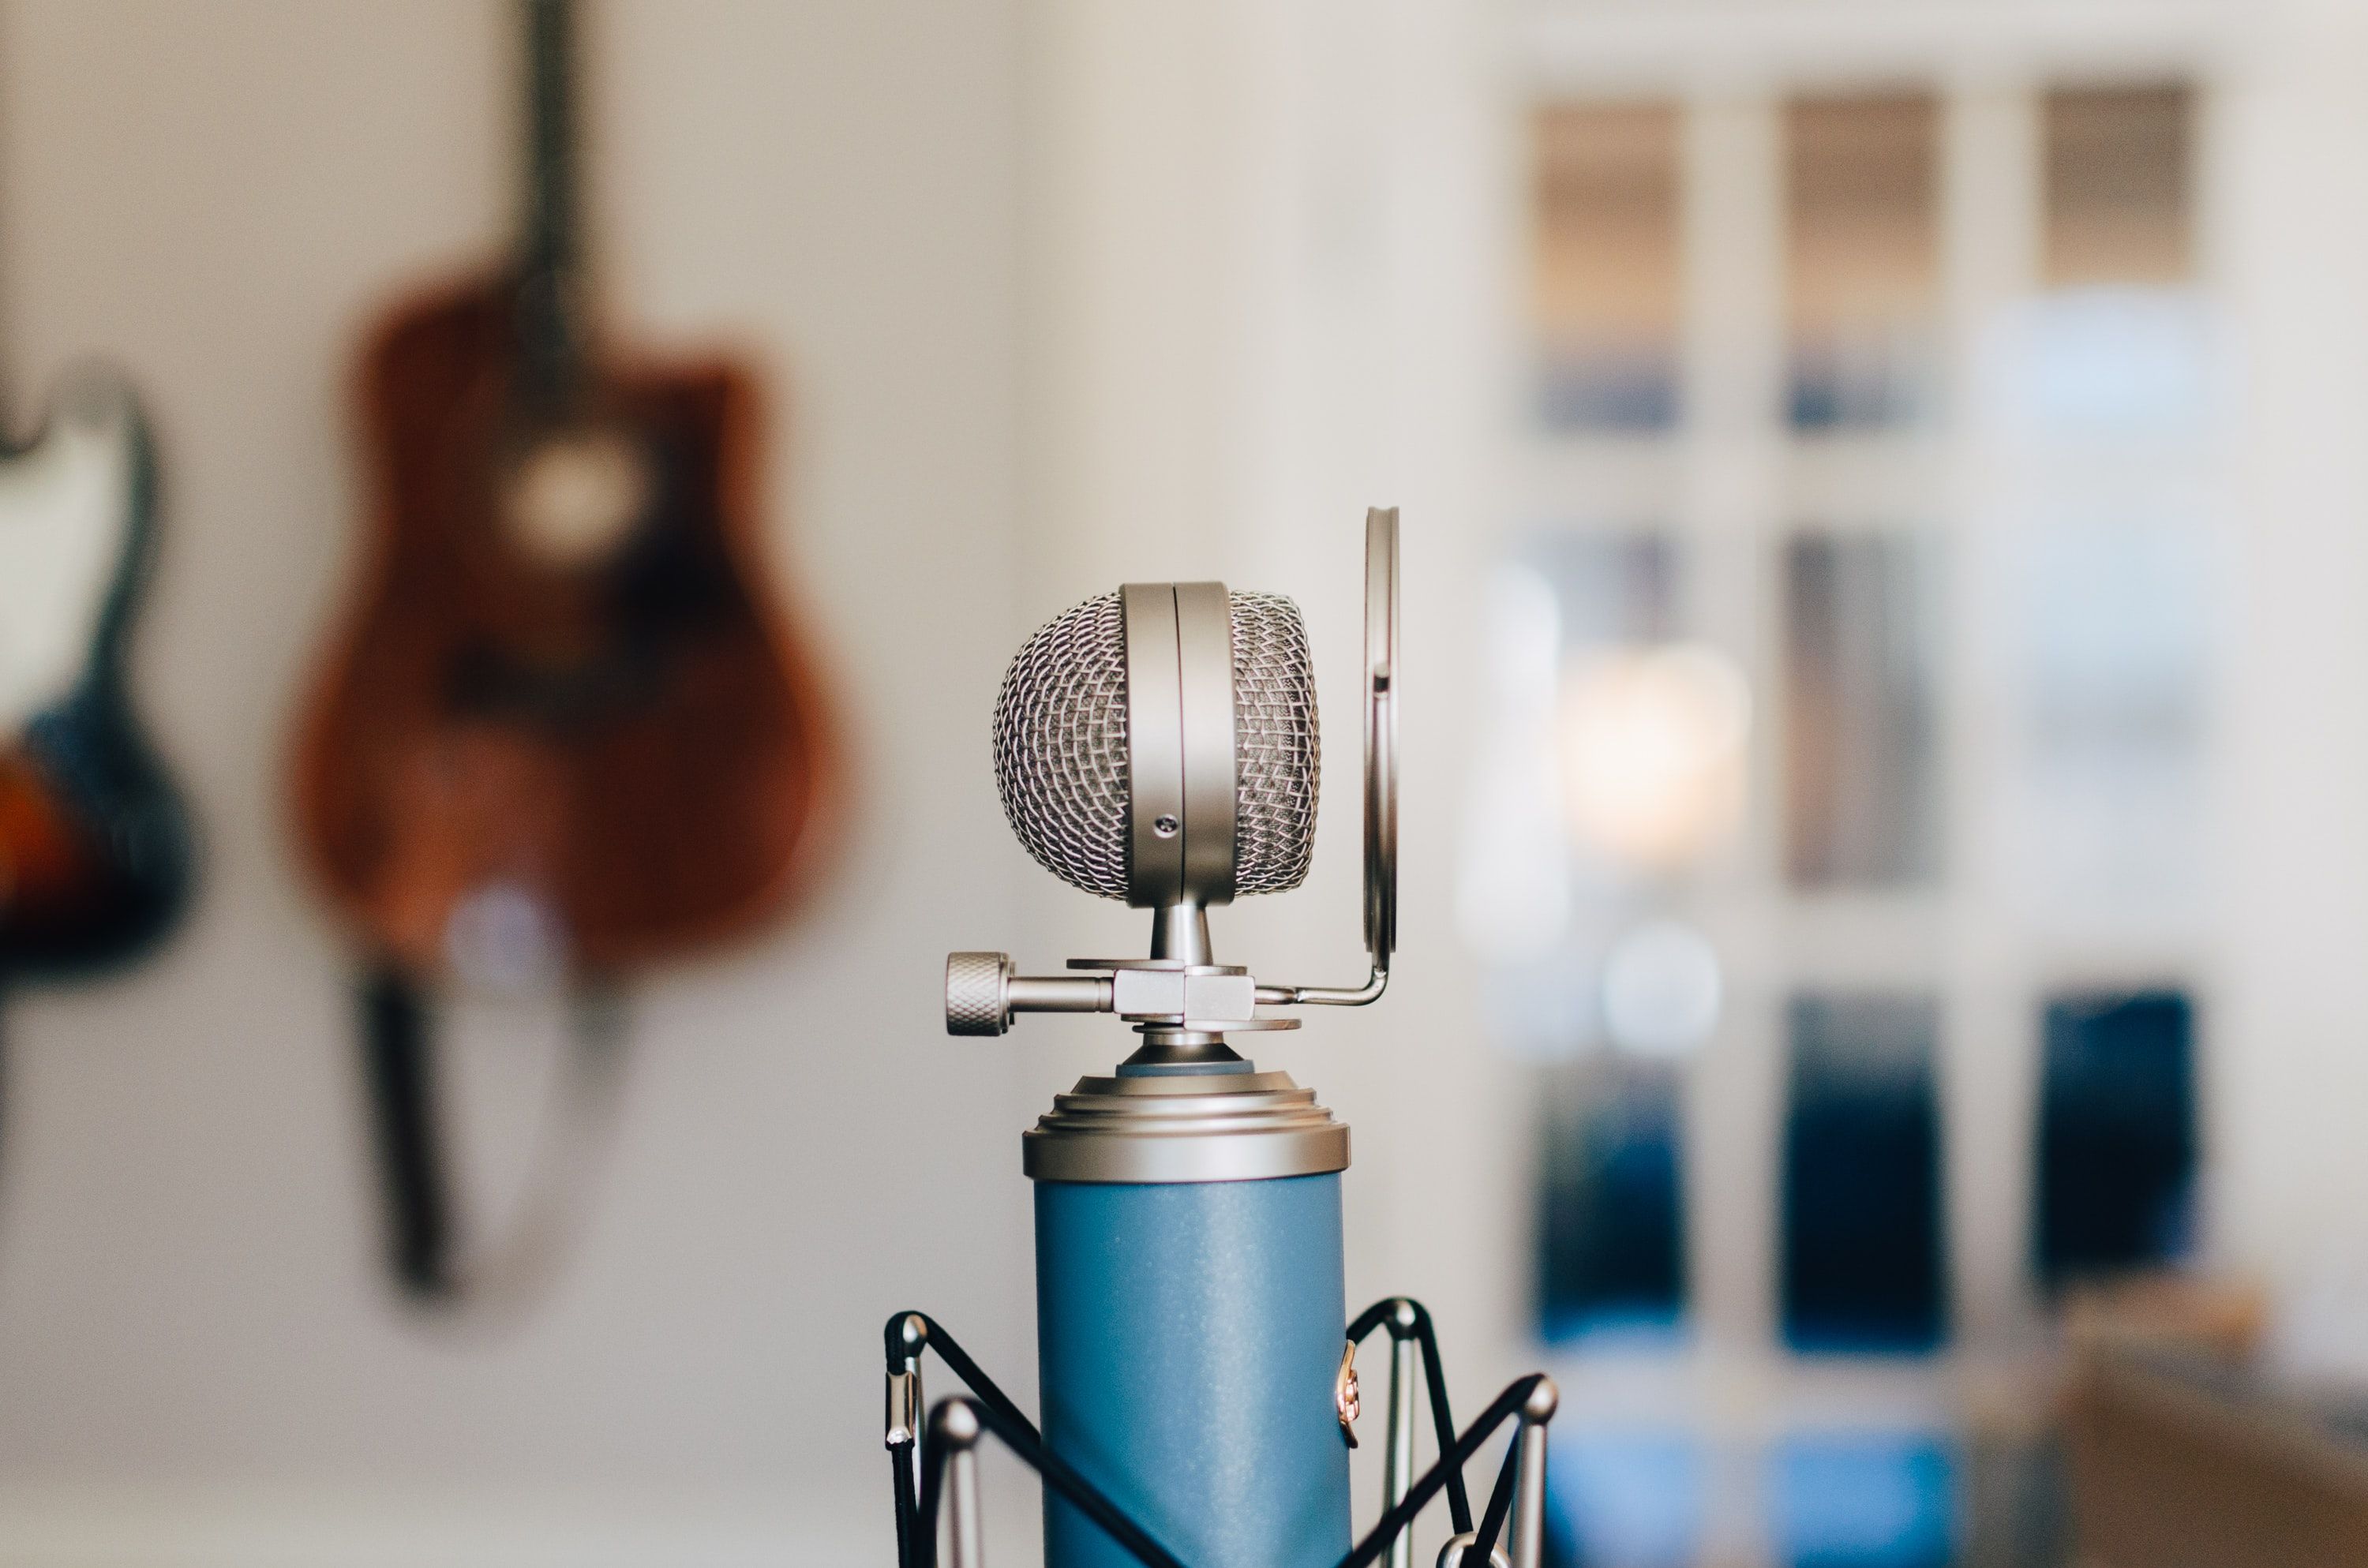 Microphone Picture. Download Free Image